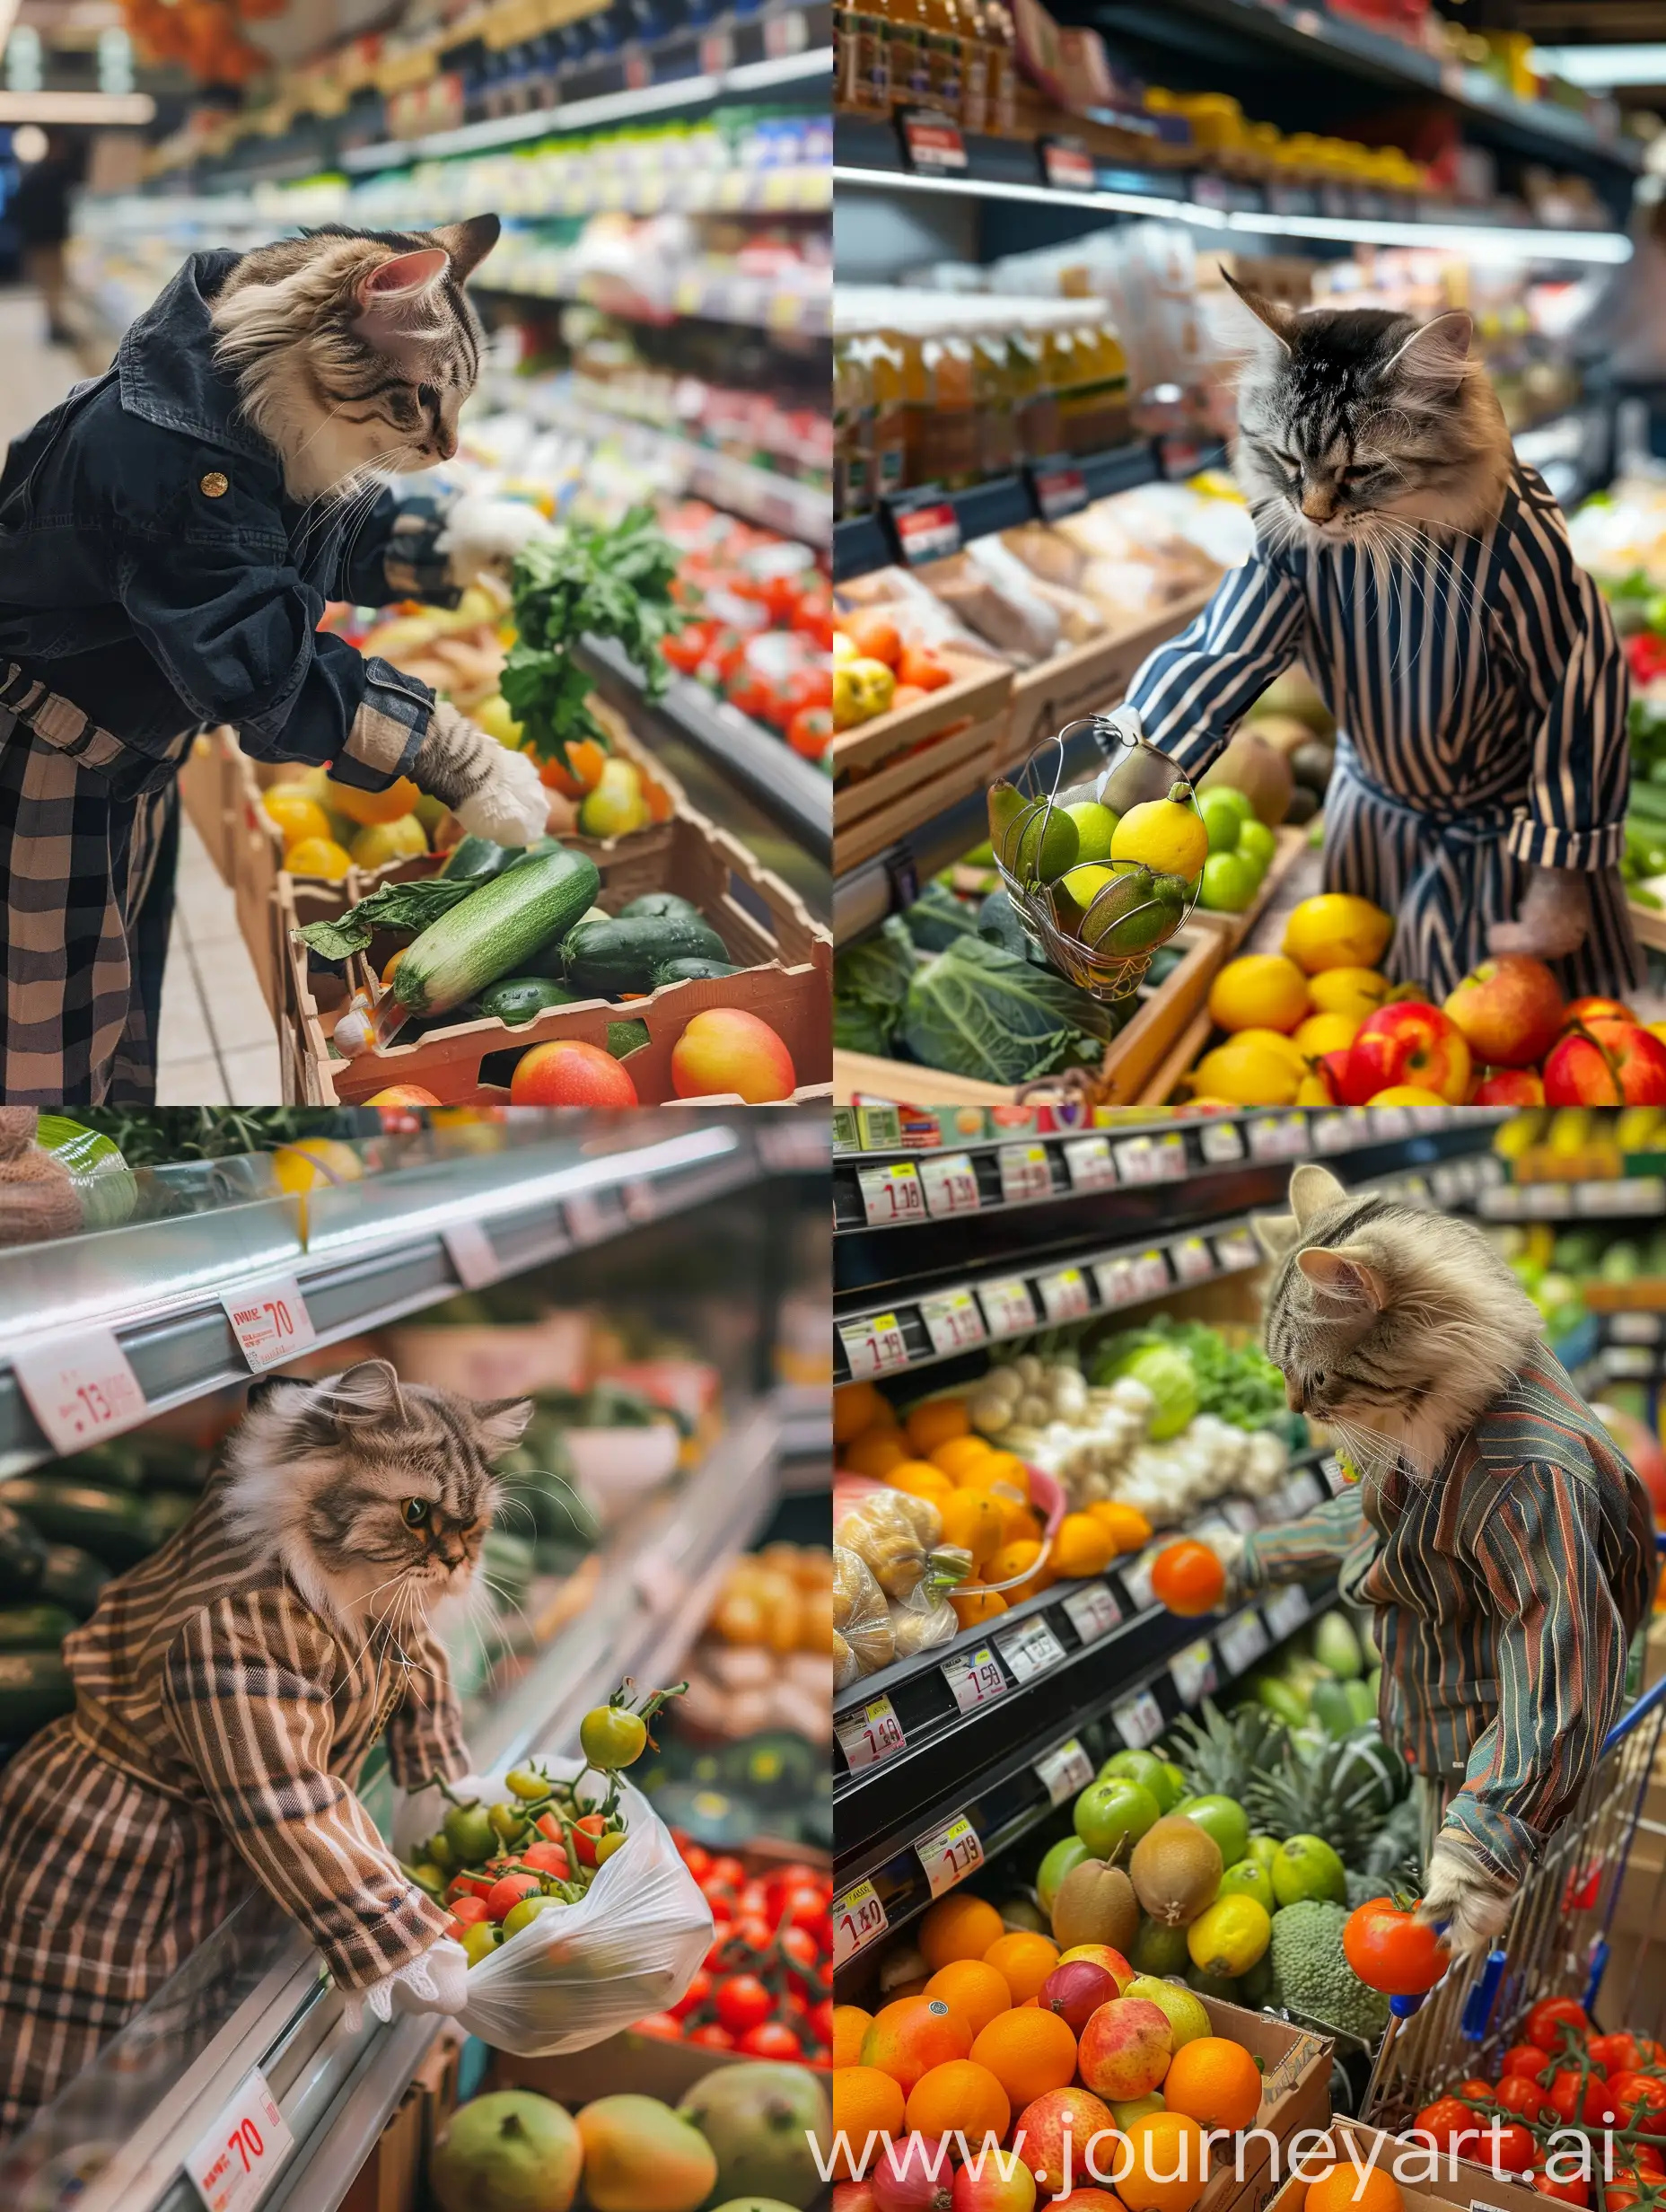 Cat-in-Clothes-Harvesting-Fruits-and-Vegetables-in-Supermarket